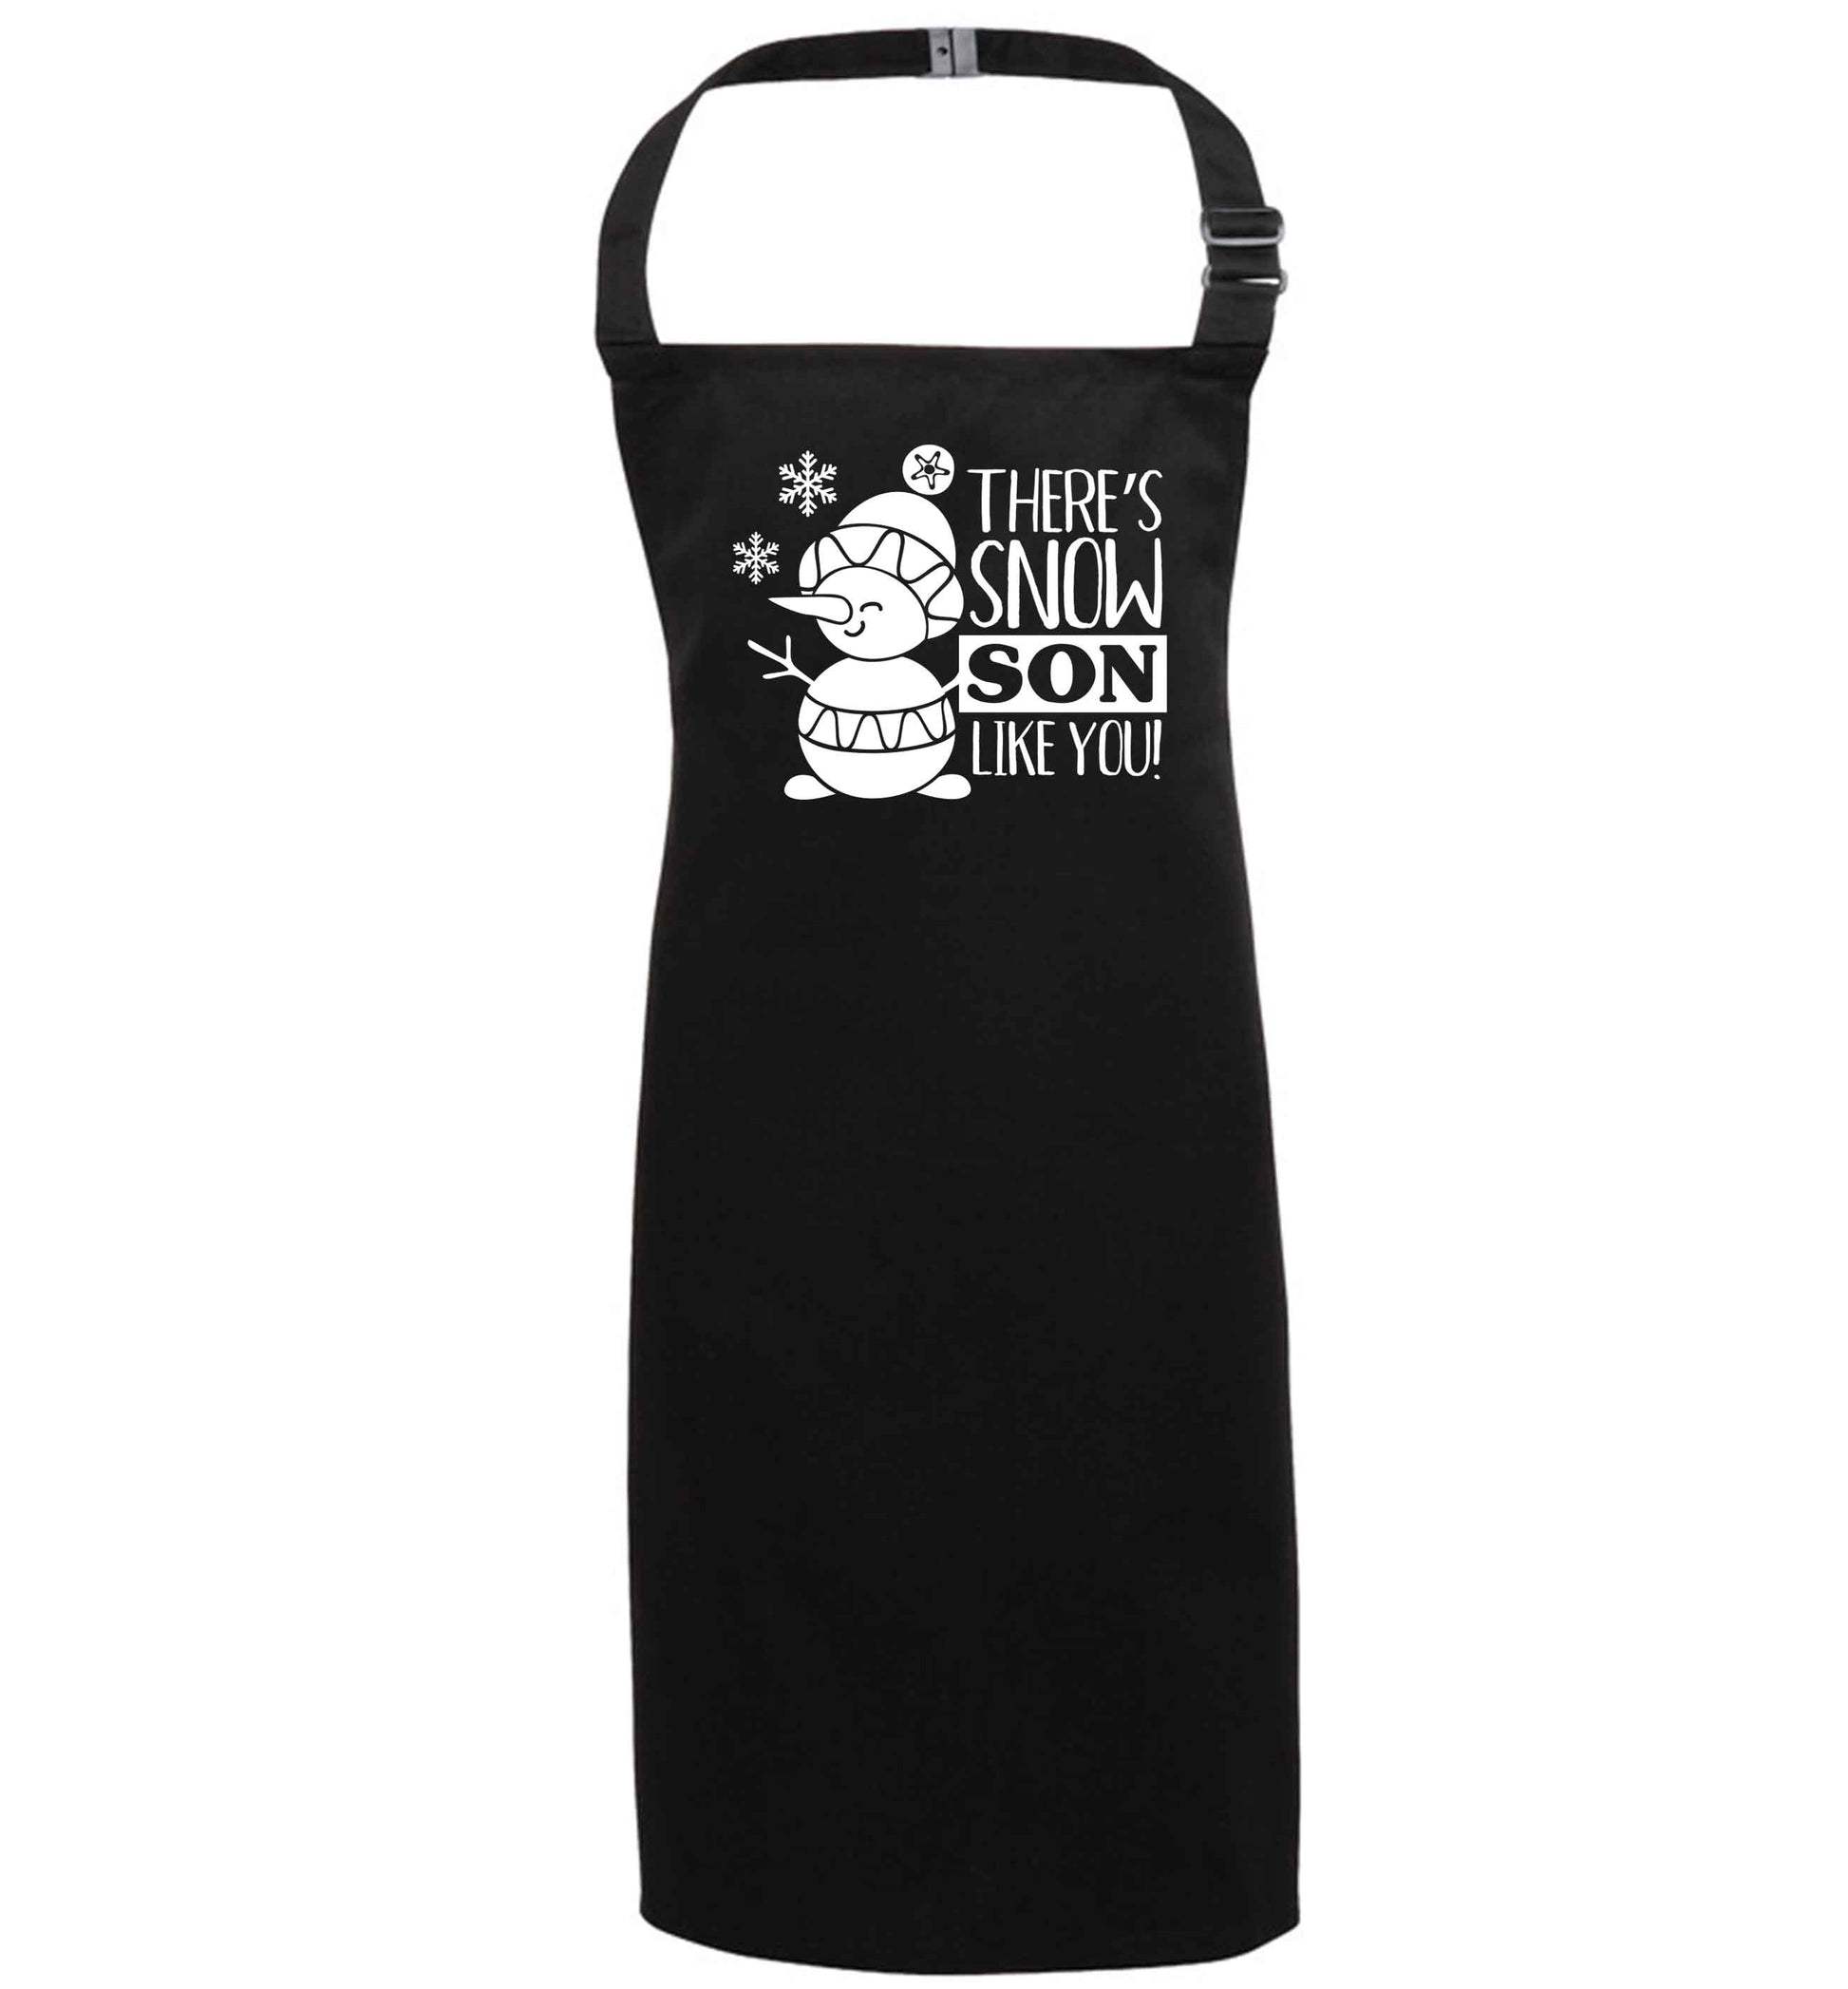 There's snow son like you black apron 7-10 years